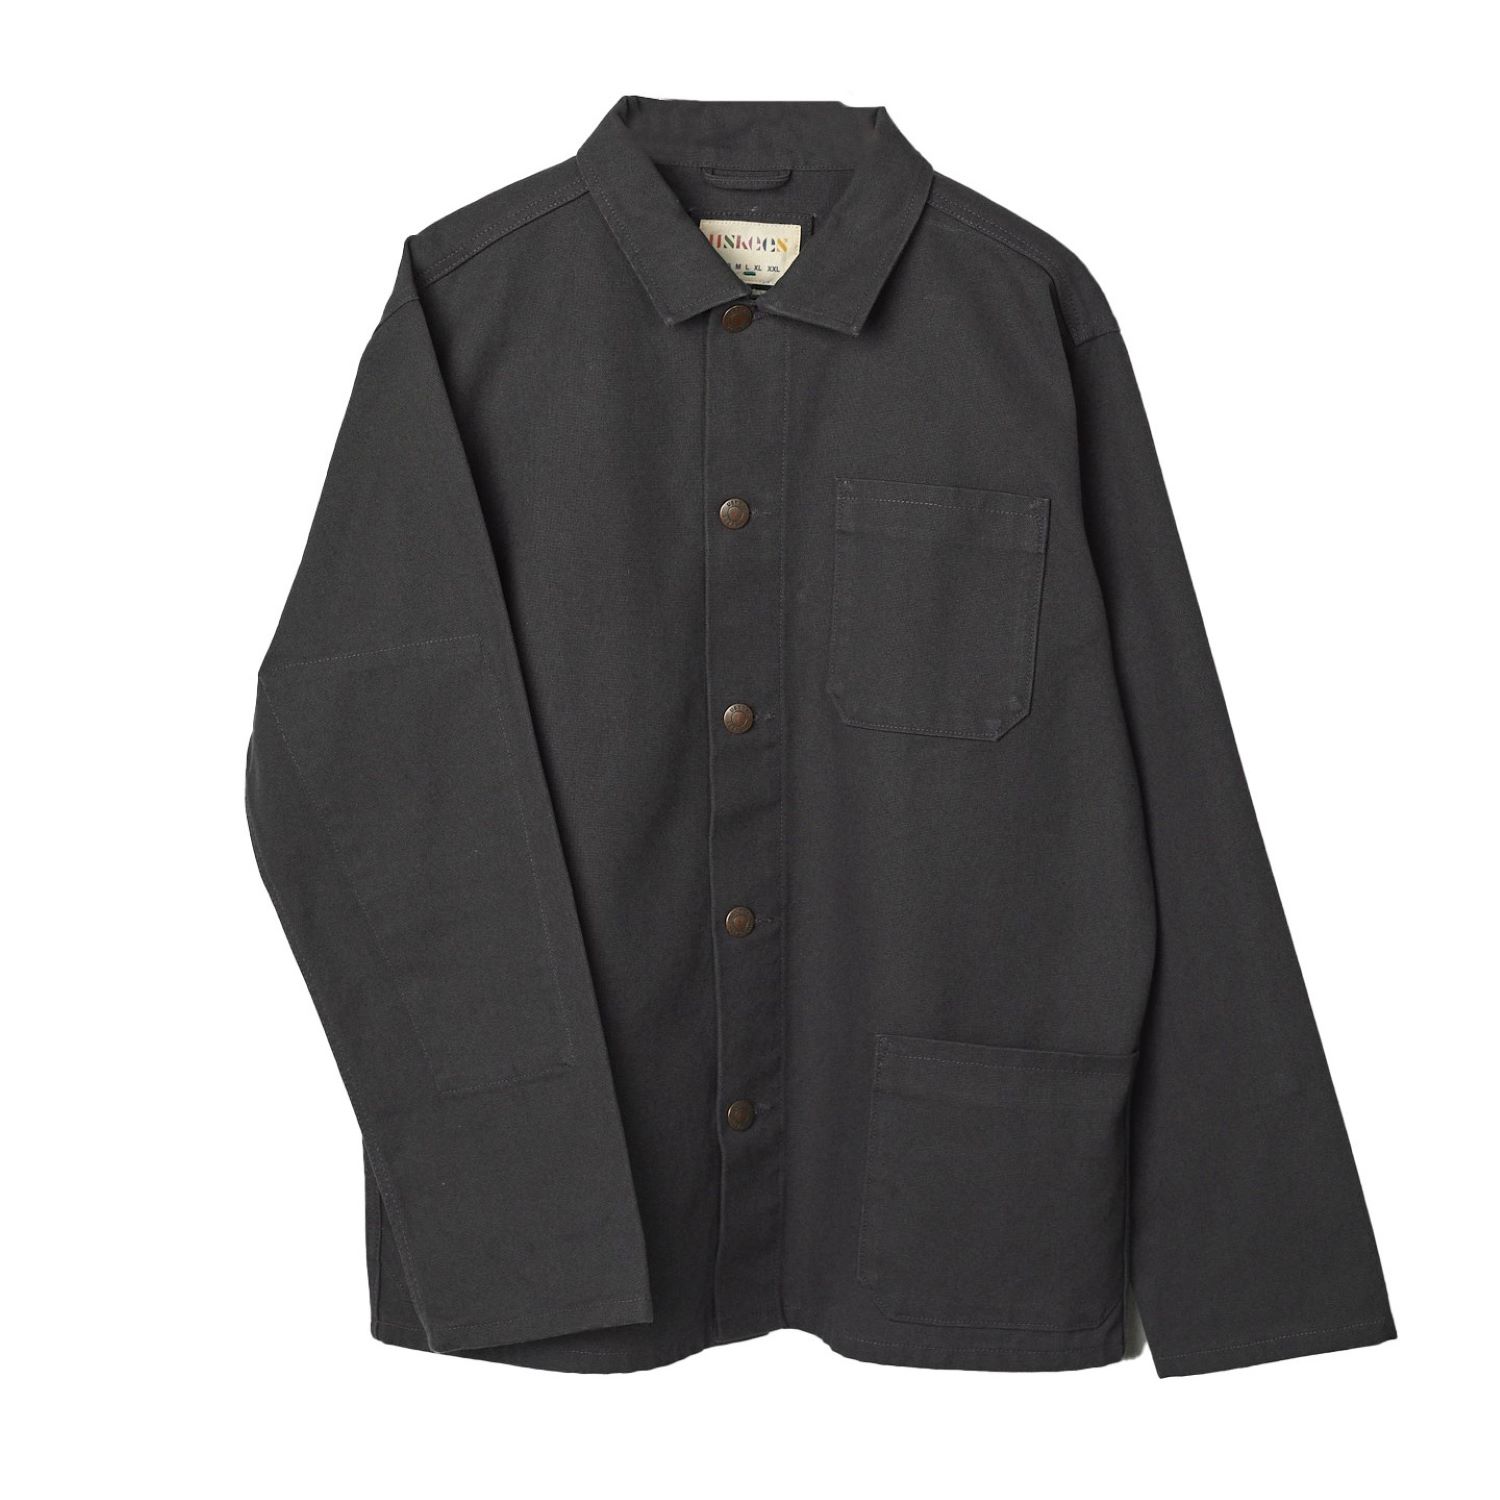 Uskees Men's Black Canvas Buttoned Overshirt - Charcoal